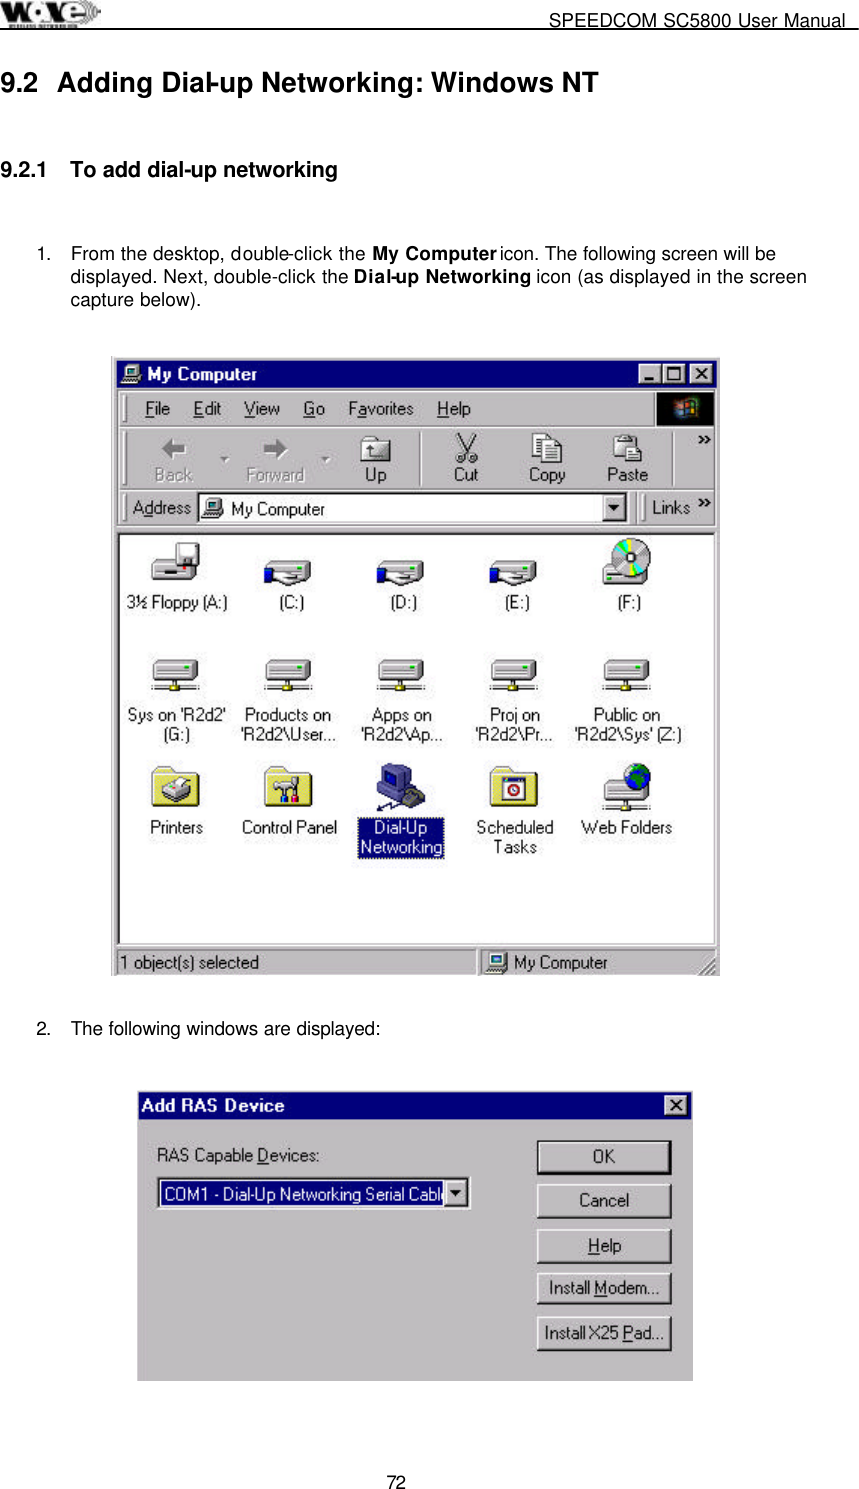     SPEEDCOM SC5800 User Manual  72 9.2  Adding Dial-up Networking: Windows NT  9.2.1  To add dial-up networking  1.  From the desktop, double-click the My Computer icon. The following screen will be displayed. Next, double-click the Dial-up Networking icon (as displayed in the screen capture below).      2.  The following windows are displayed:    